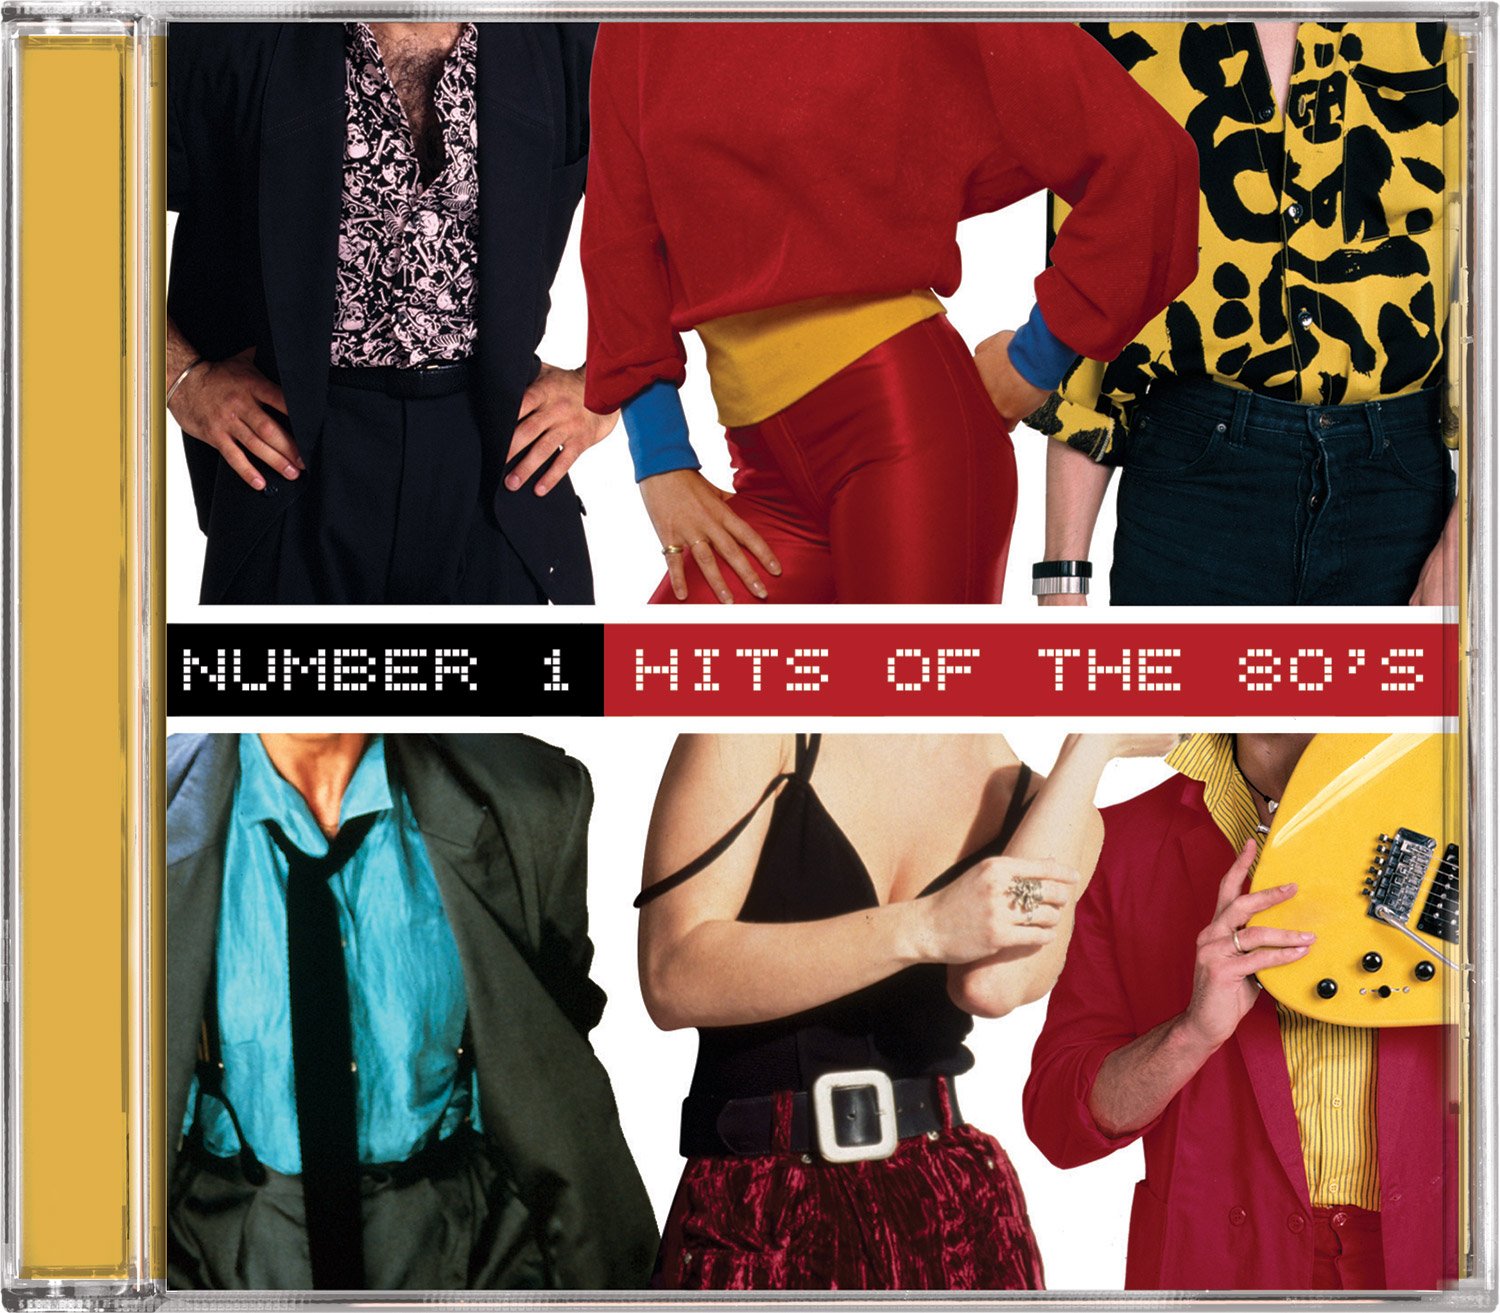 Number 1 Hits of the 80s